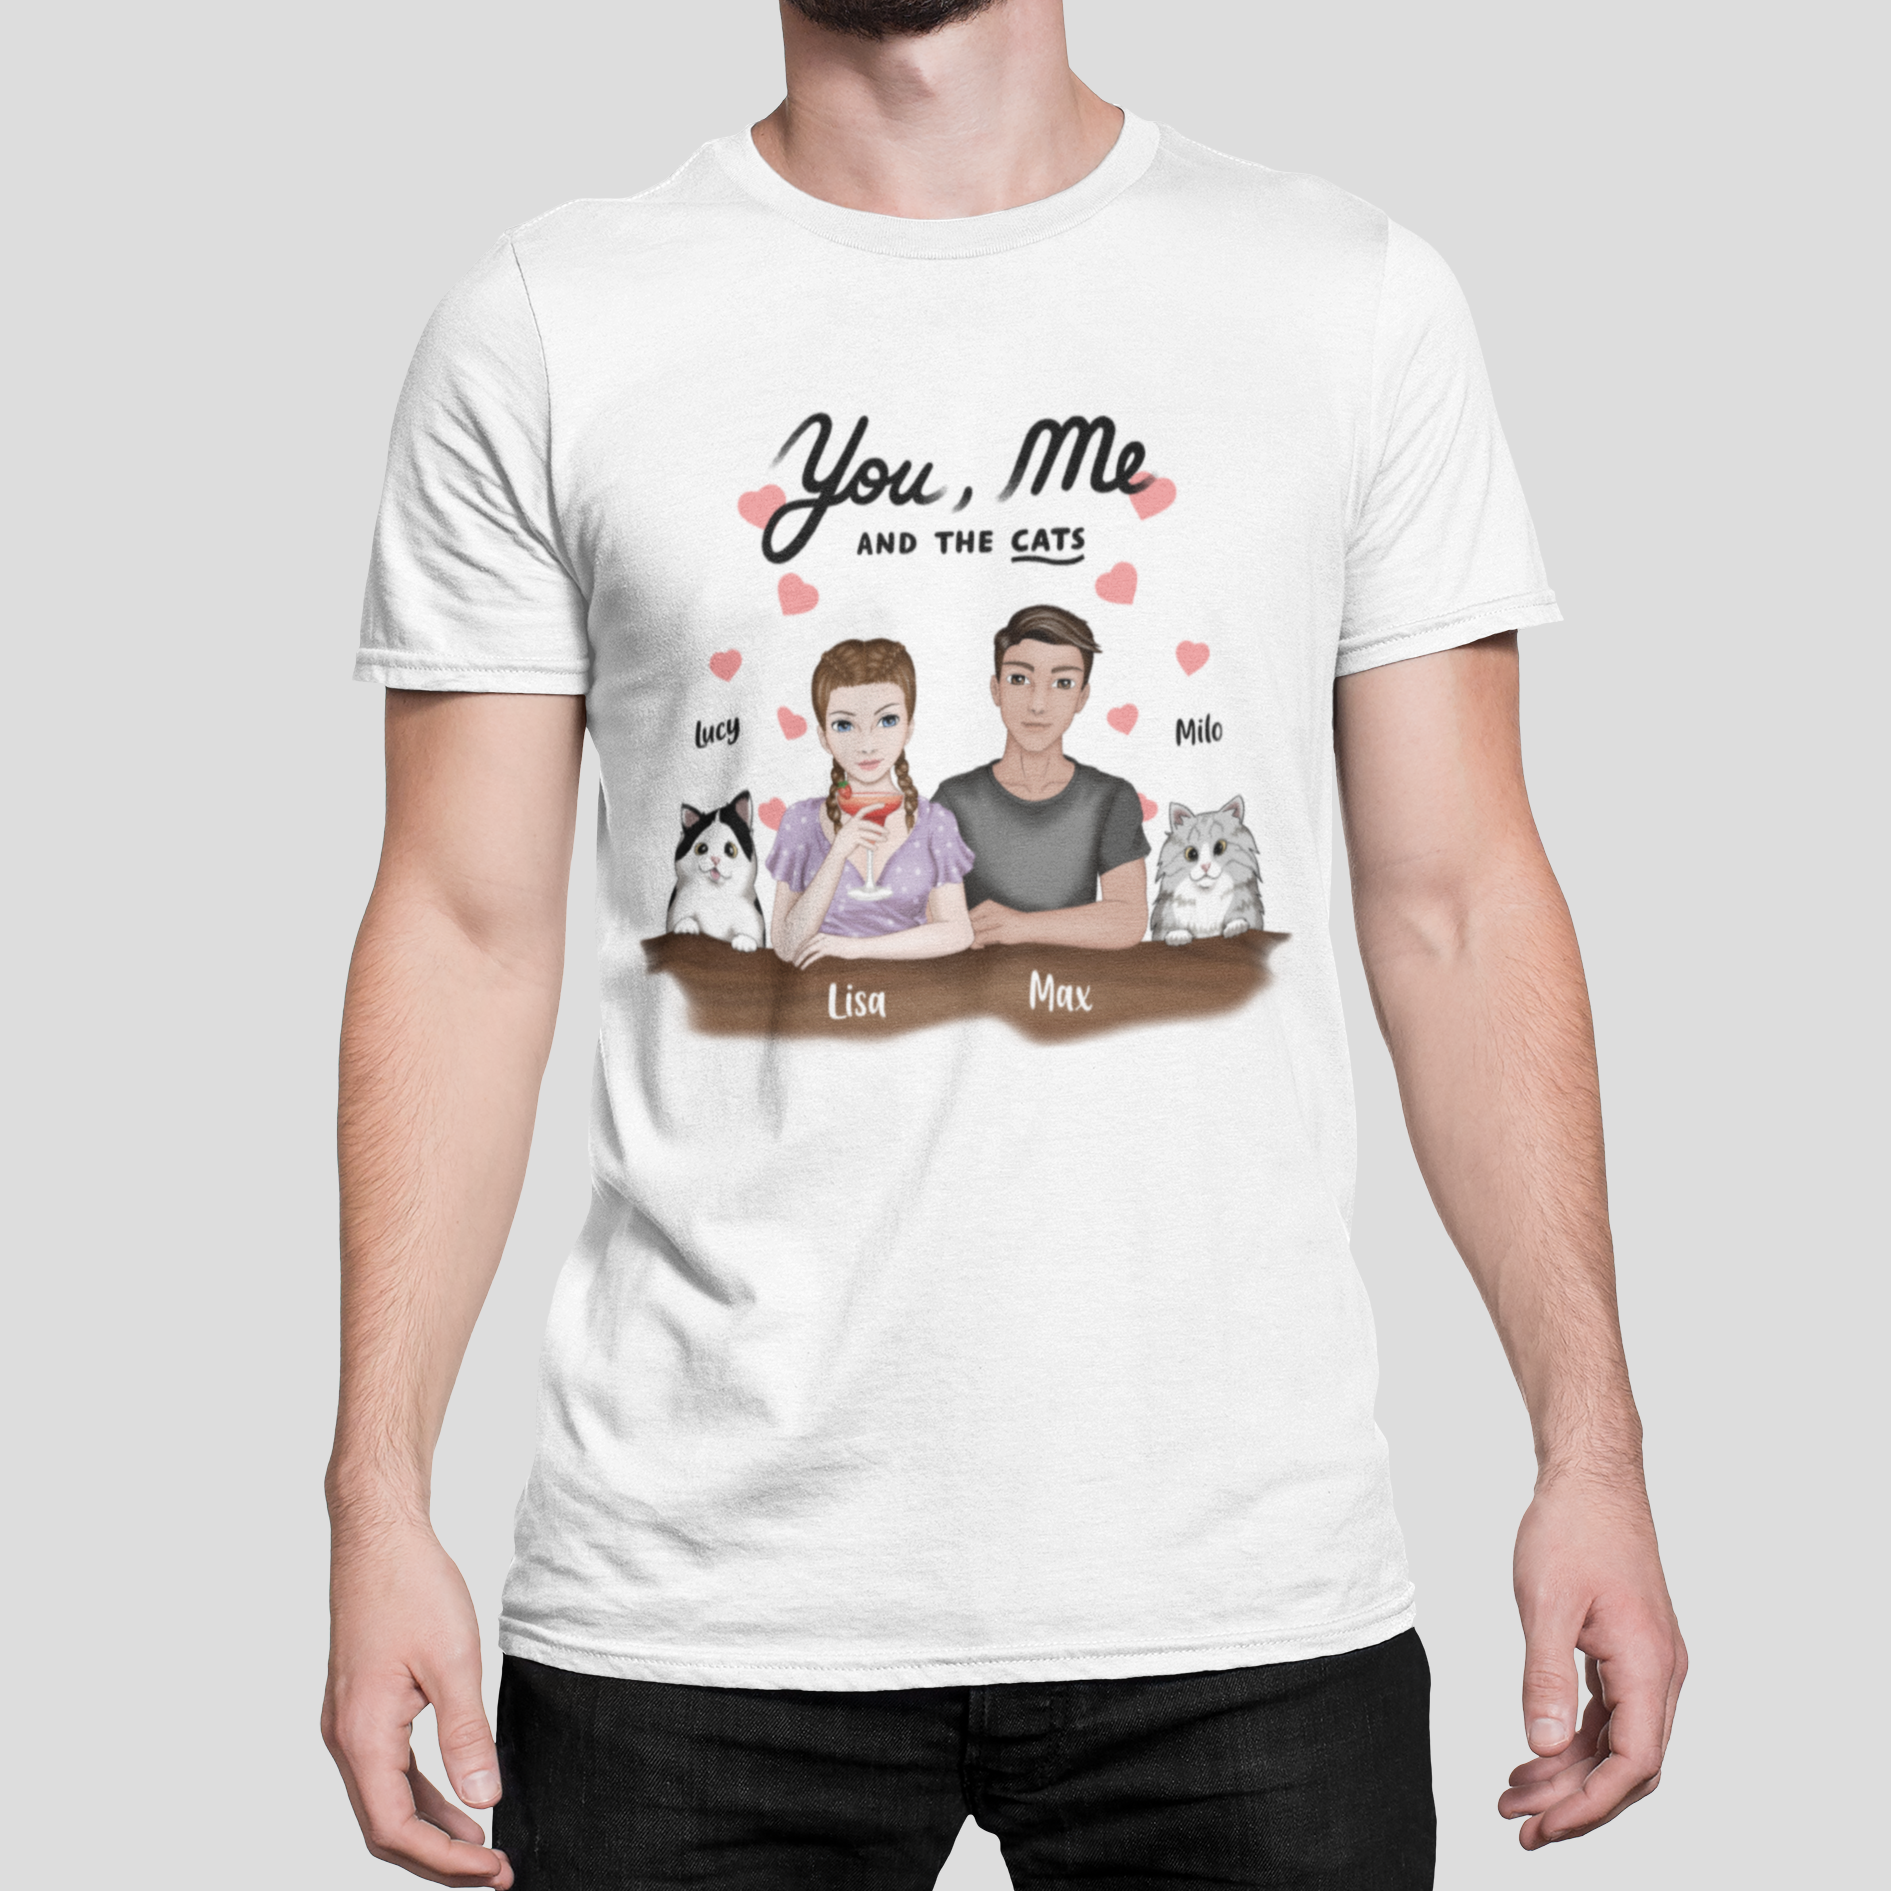 Man wearing a t-shirt featuring the 'You, Me AND THE CATS' design with personalized woman and man characters and two custom cat images, each with their chosen name above.